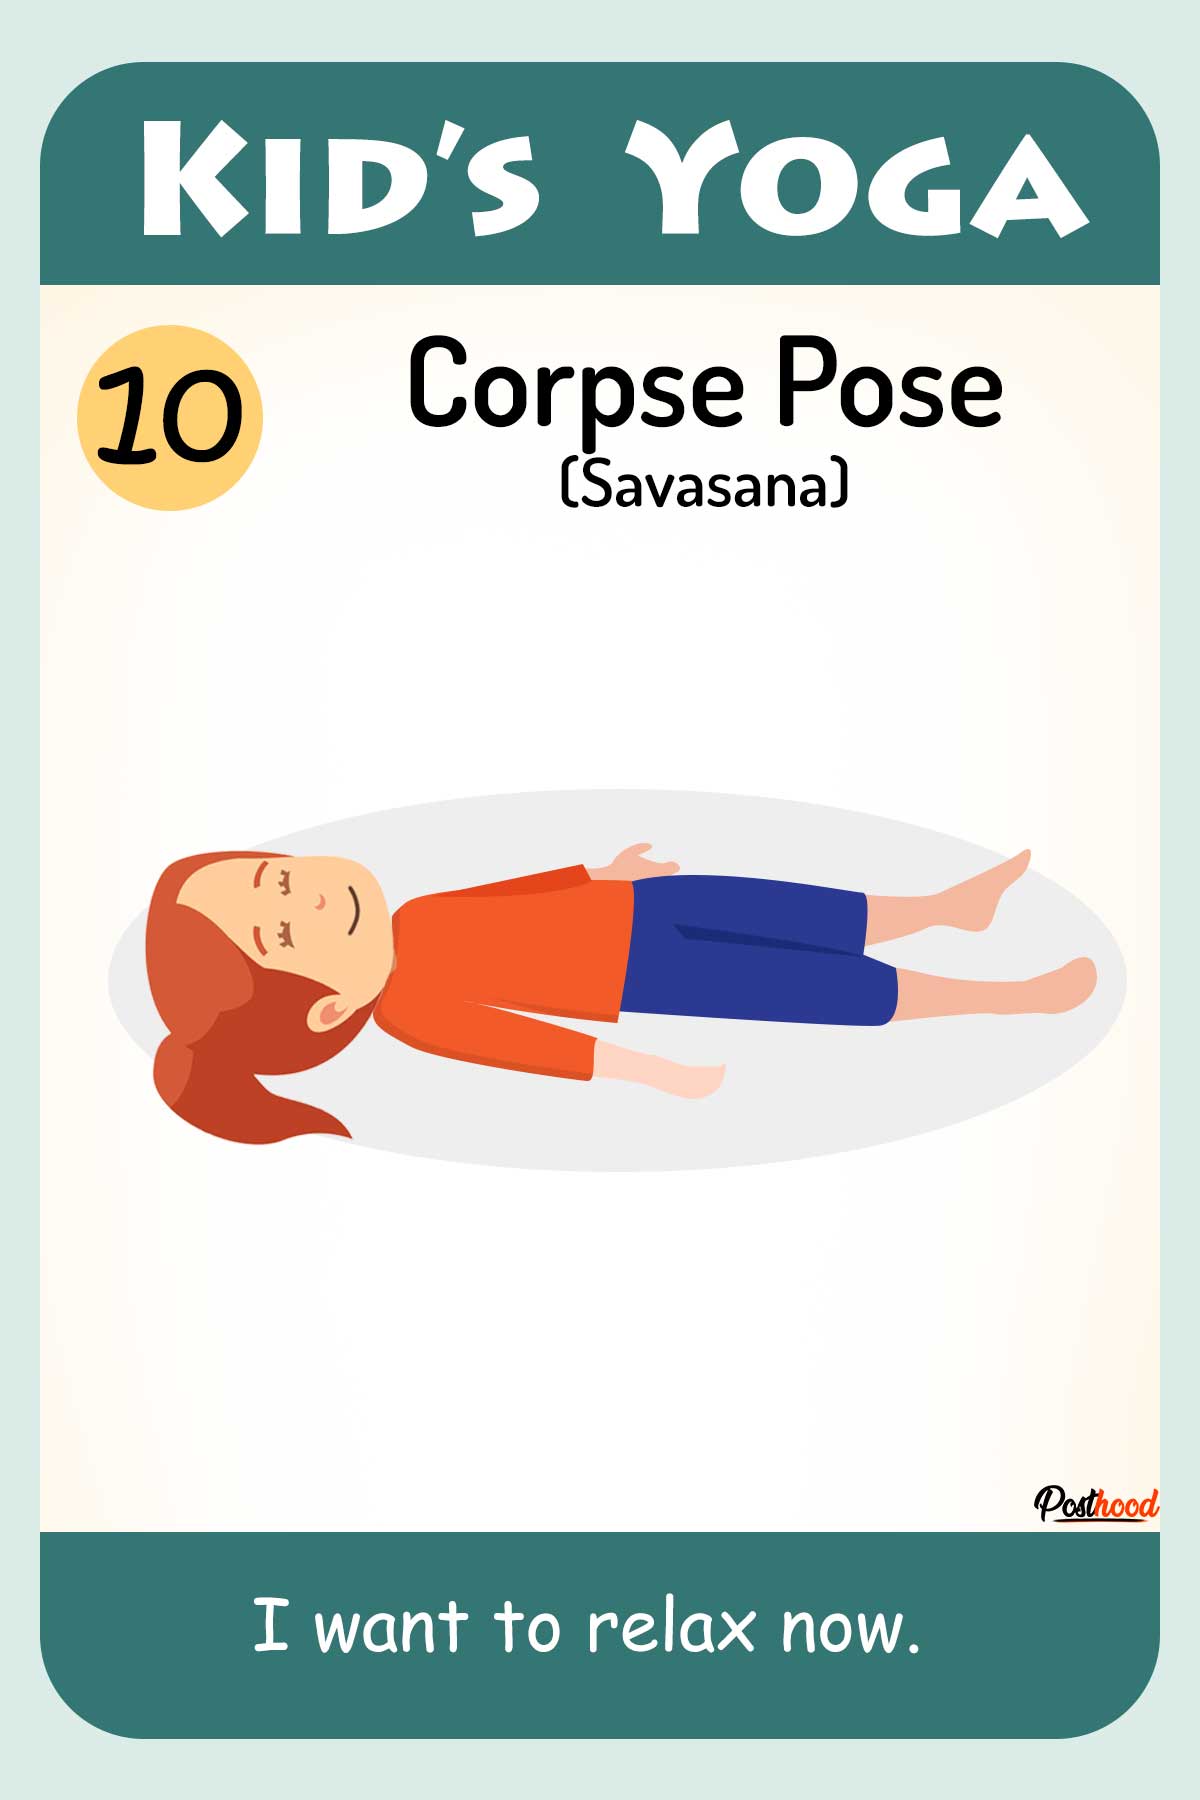 Fun and engaging kids yoga cards to learn yoga easily and effortlessly. Best and easy yoga postures for your kids.